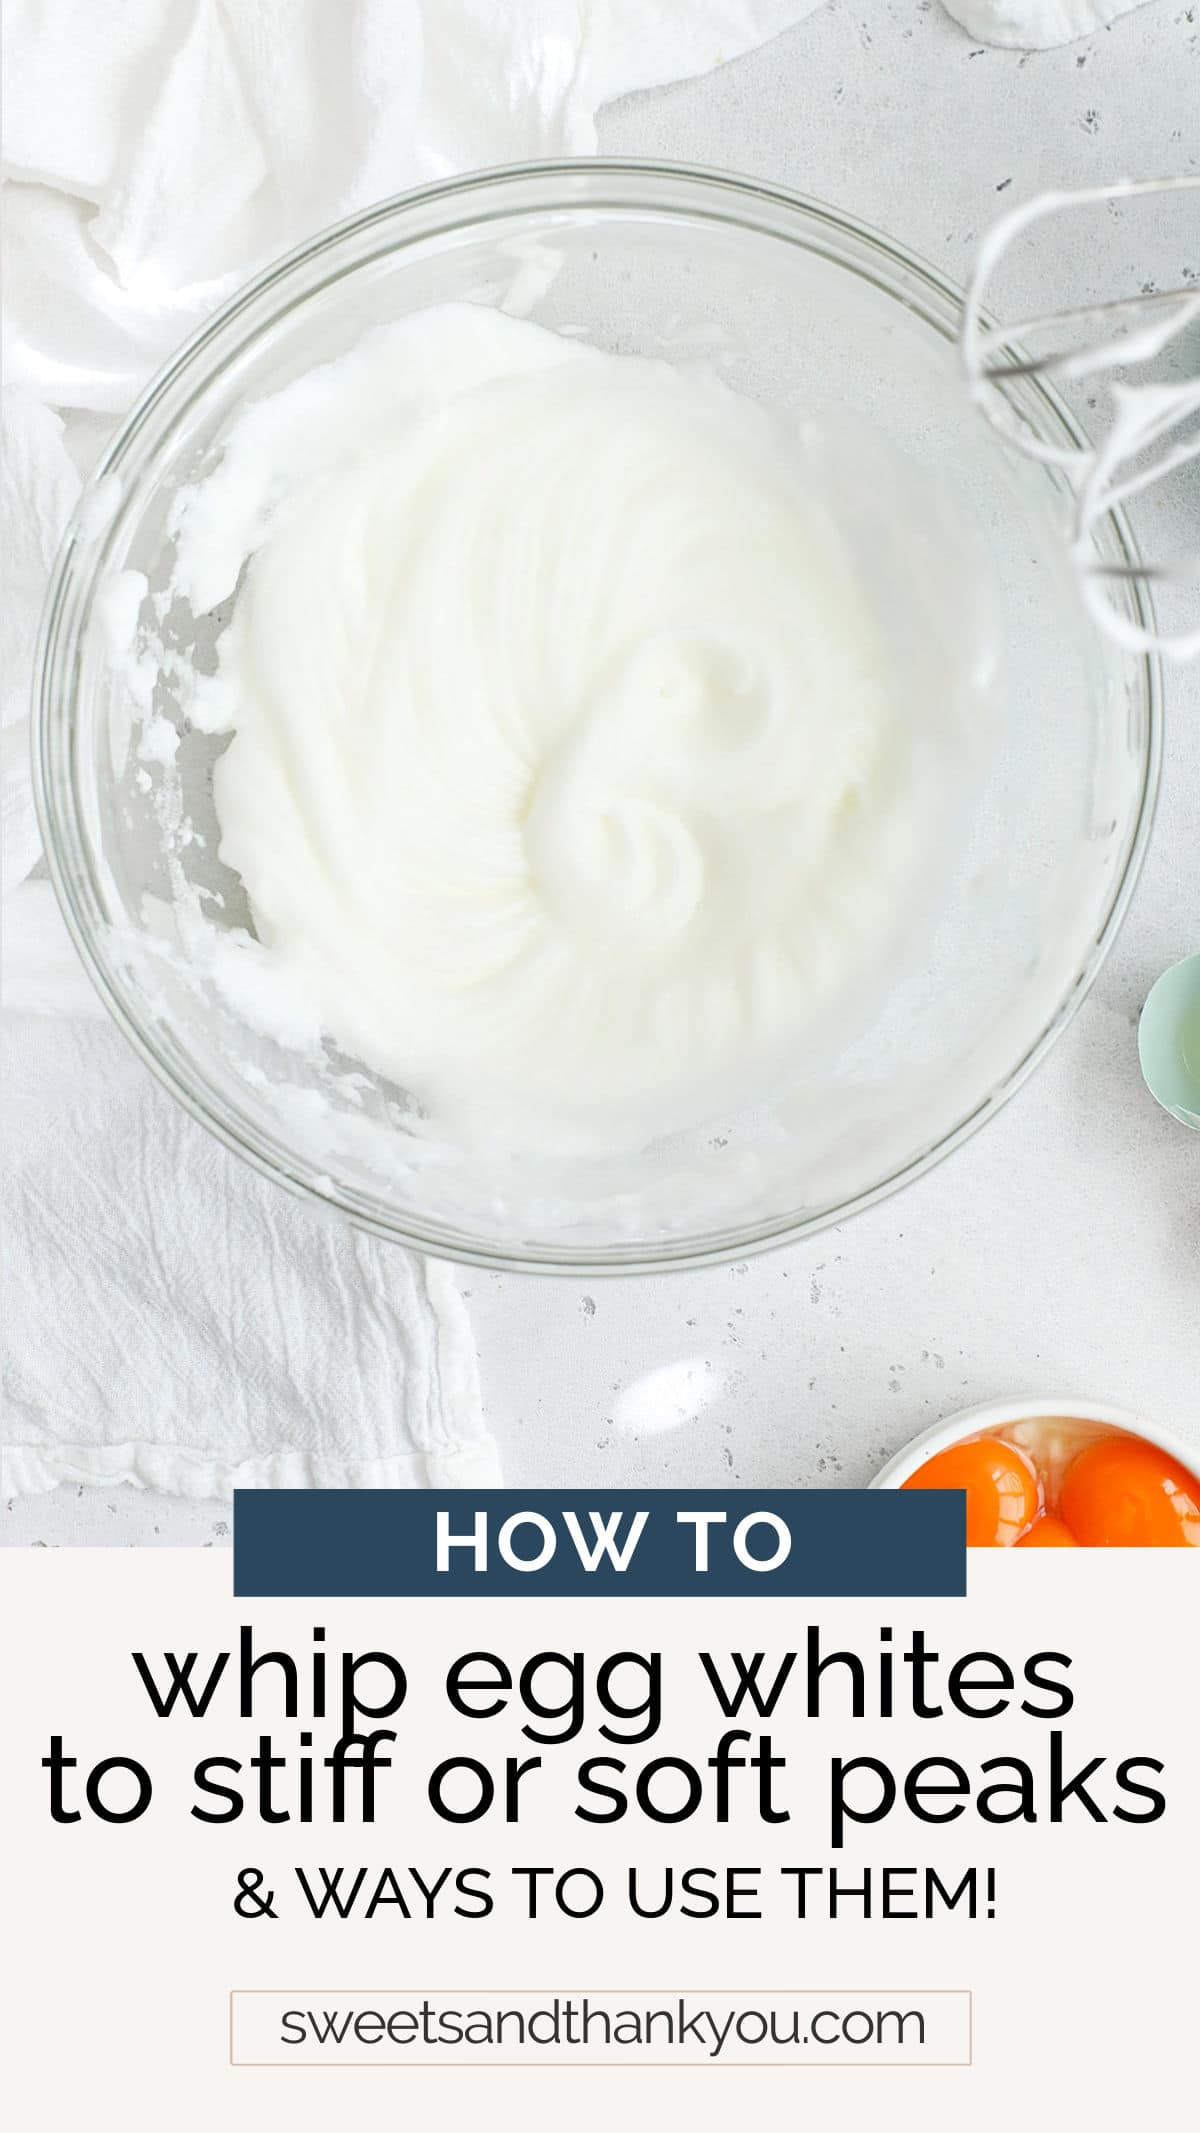 How To Whip Egg Whites - Learn how to whip egg whites into stiff peaks or soft peaks for all your favorite recipes. Don't miss our tips! // how to whip egg whites to stiff peaks // egg whites stiff peaks // egg whites soft peaks // why won't my eggs whip // whipping egg whites // soft peaks vs. firm peaks // soft peaks vs firm peaks // how to whip an egg white // how to use whipped egg whites // how long does it take to whip egg whites